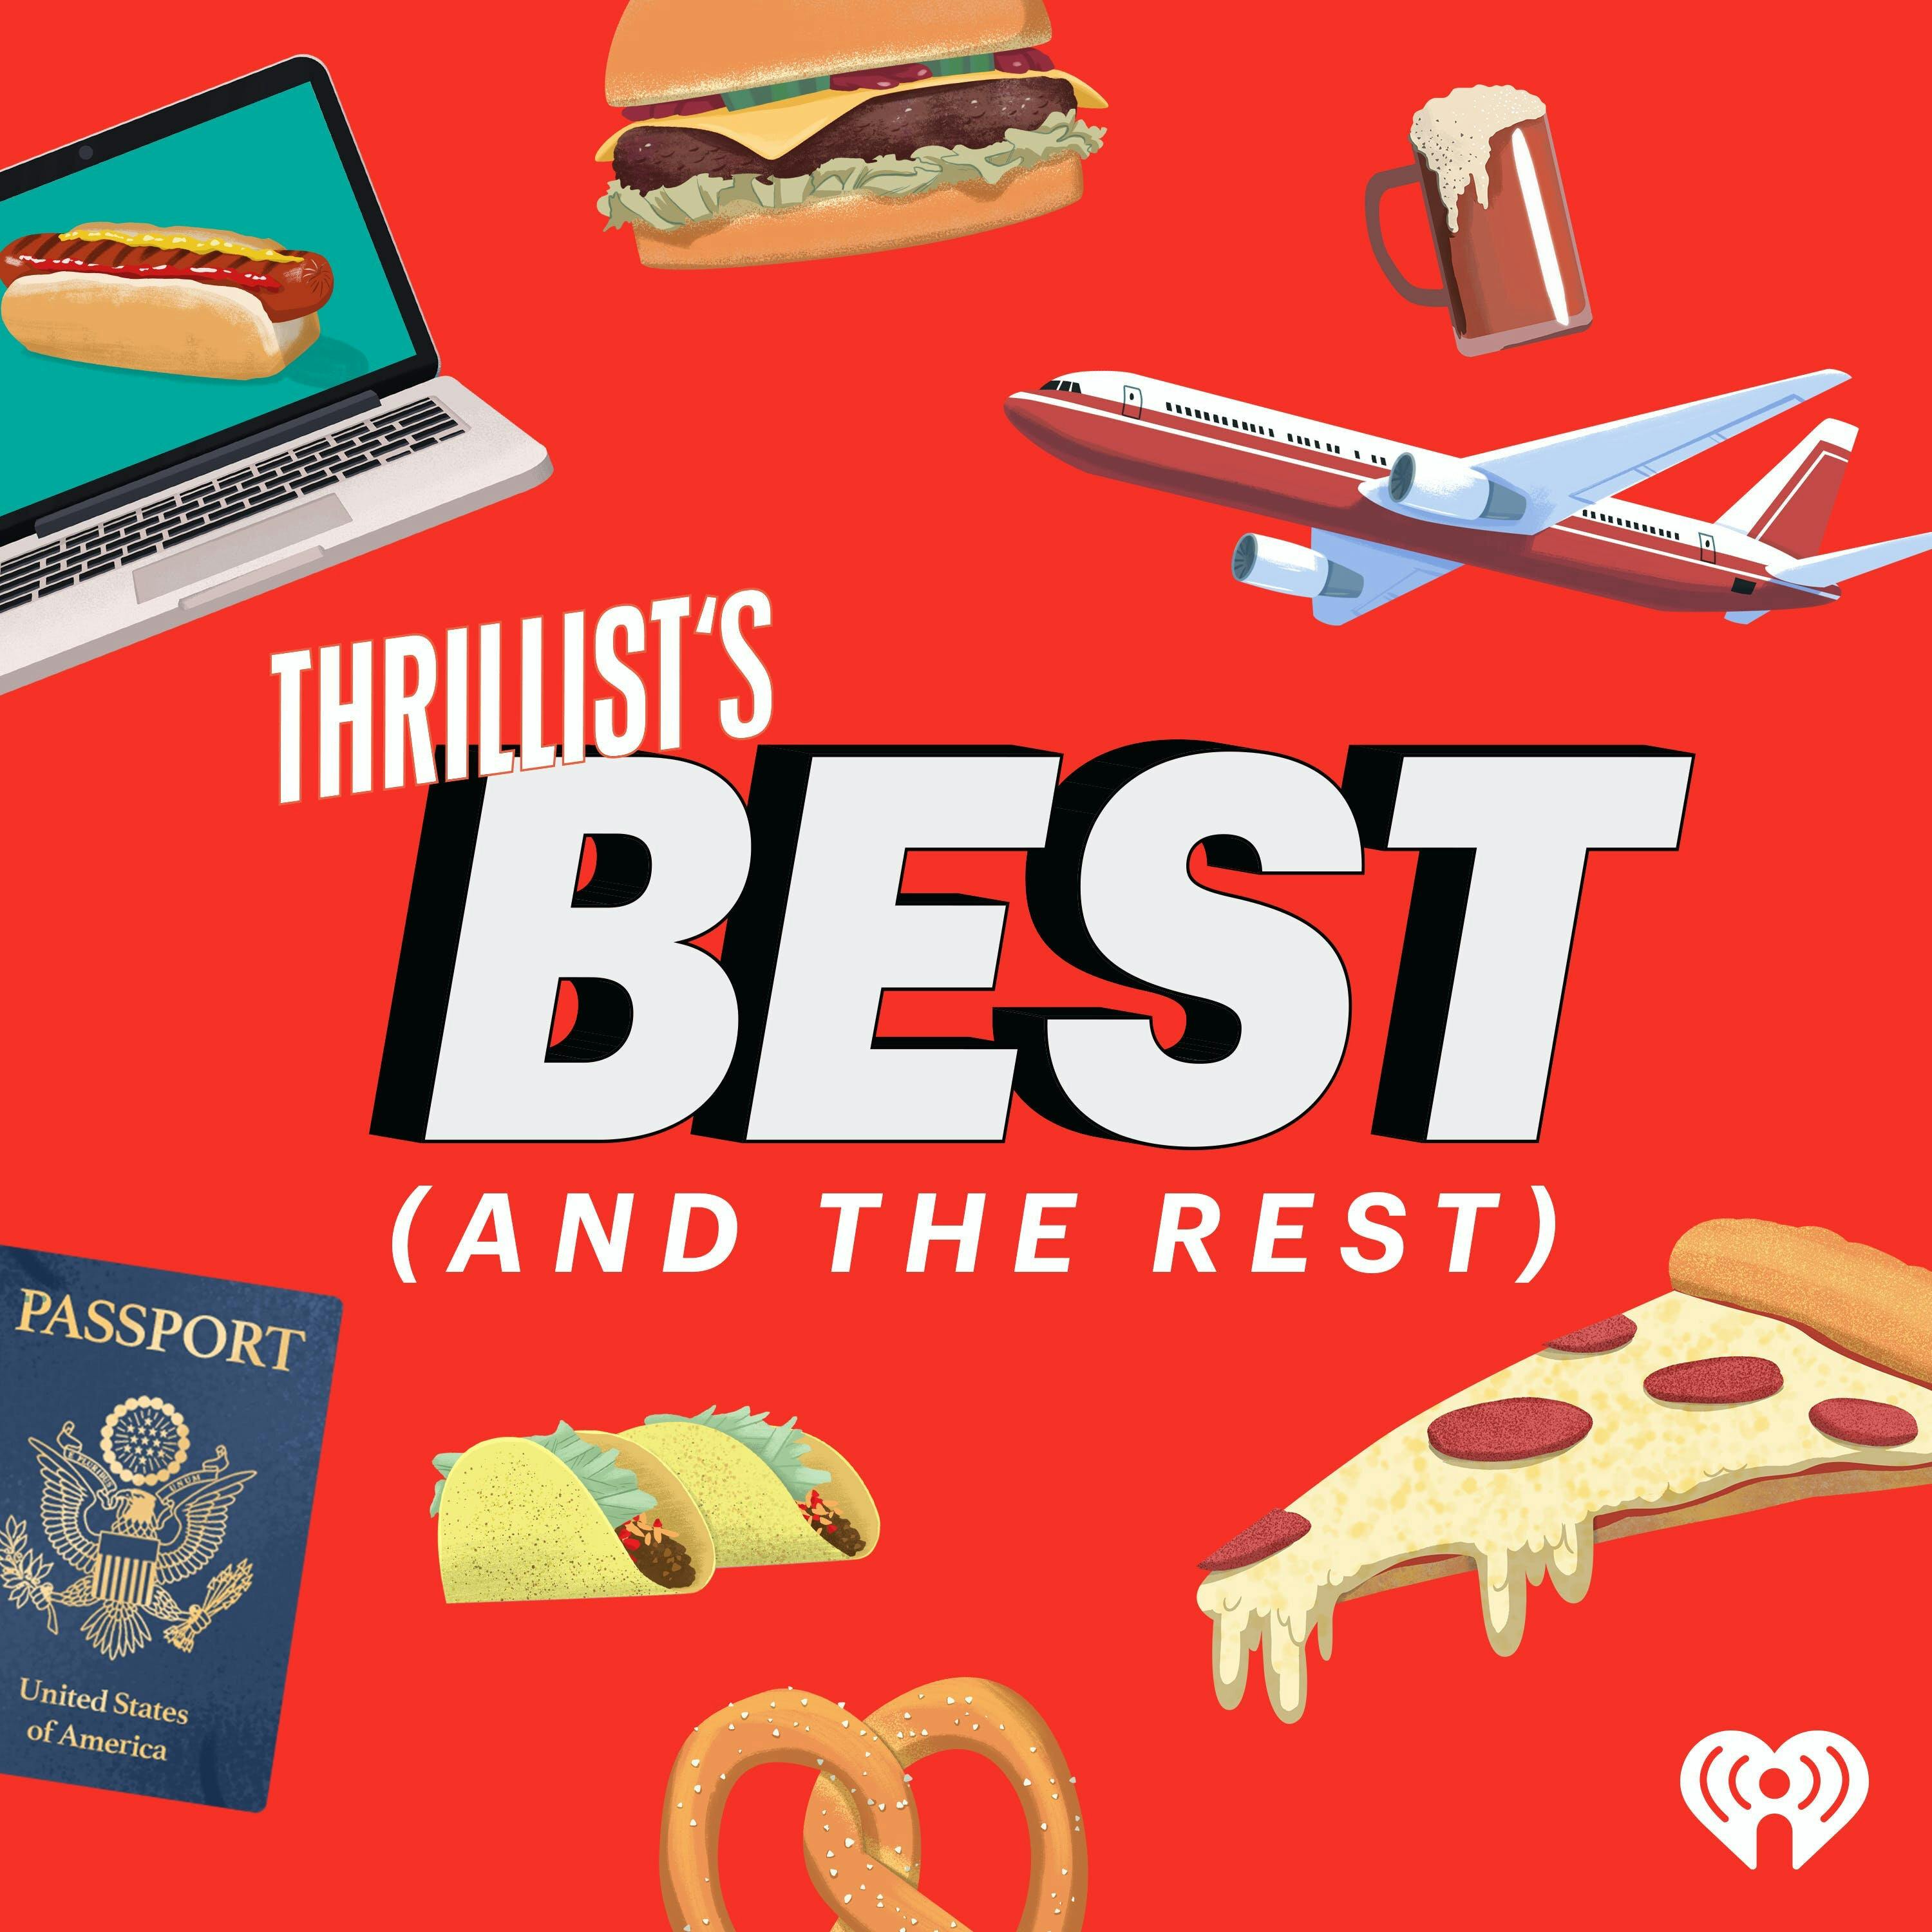 THRILLIST’S BEST: What’s the Best Cure For a Hangover? (with Thrillist Founder Ben Lerer)